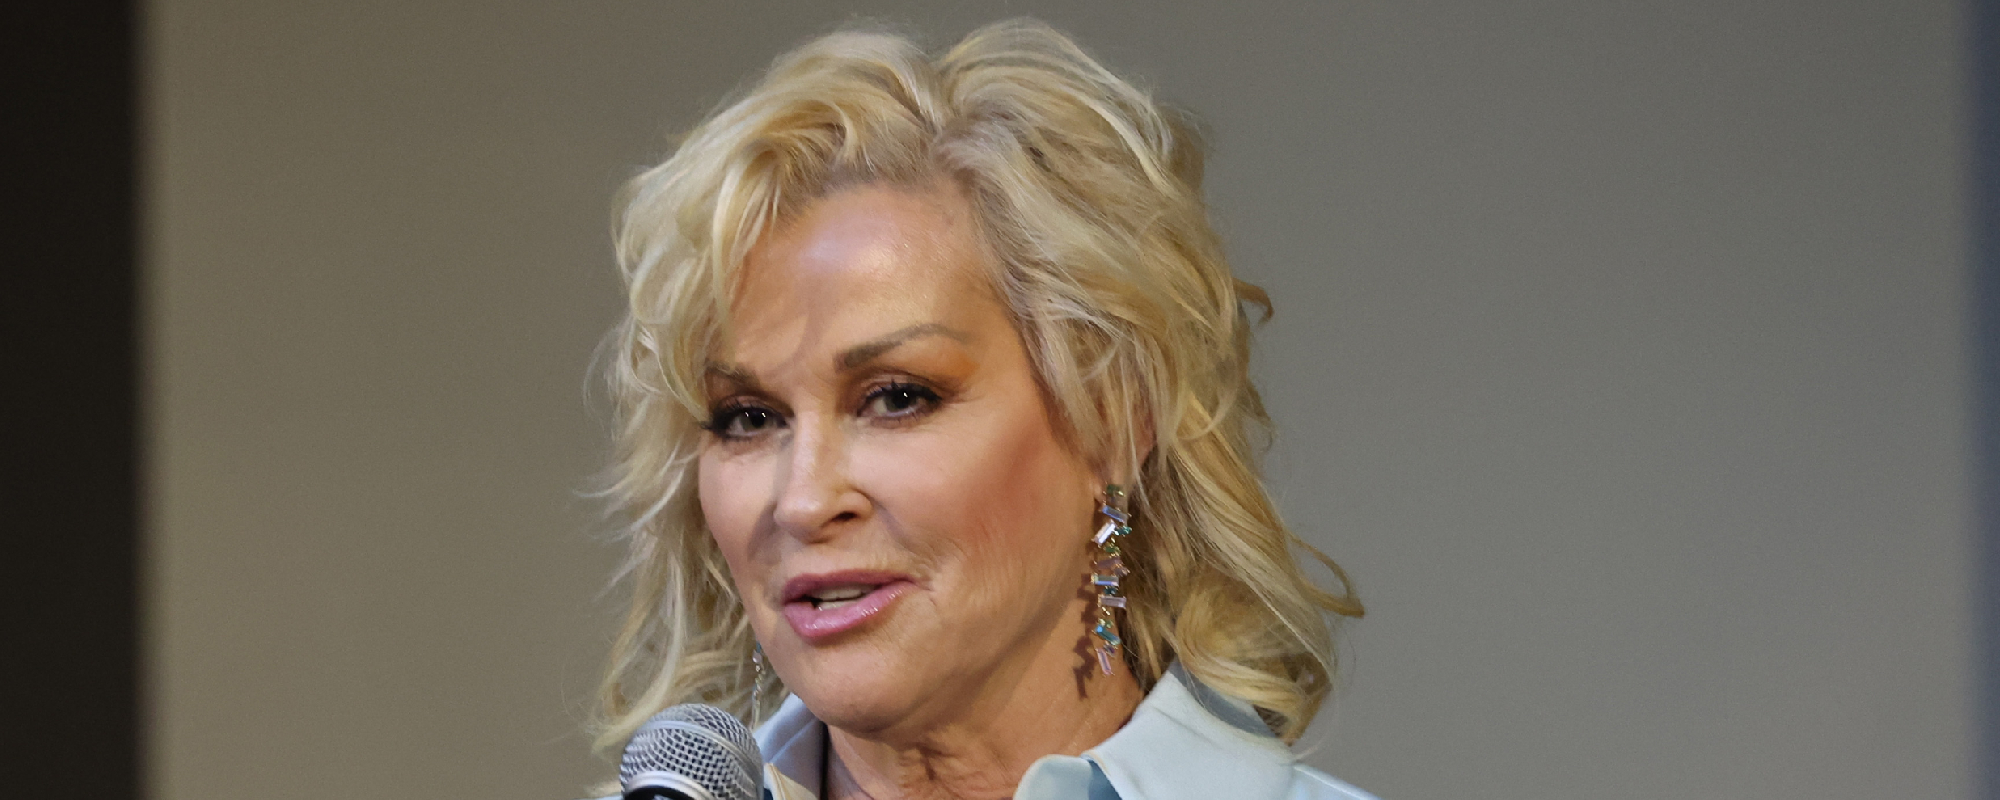 Lorrie Morgan Celebrates Her Grand Opry “Ruby Anniversary” and Recalls the Christmas Gift George Jones Offered Her